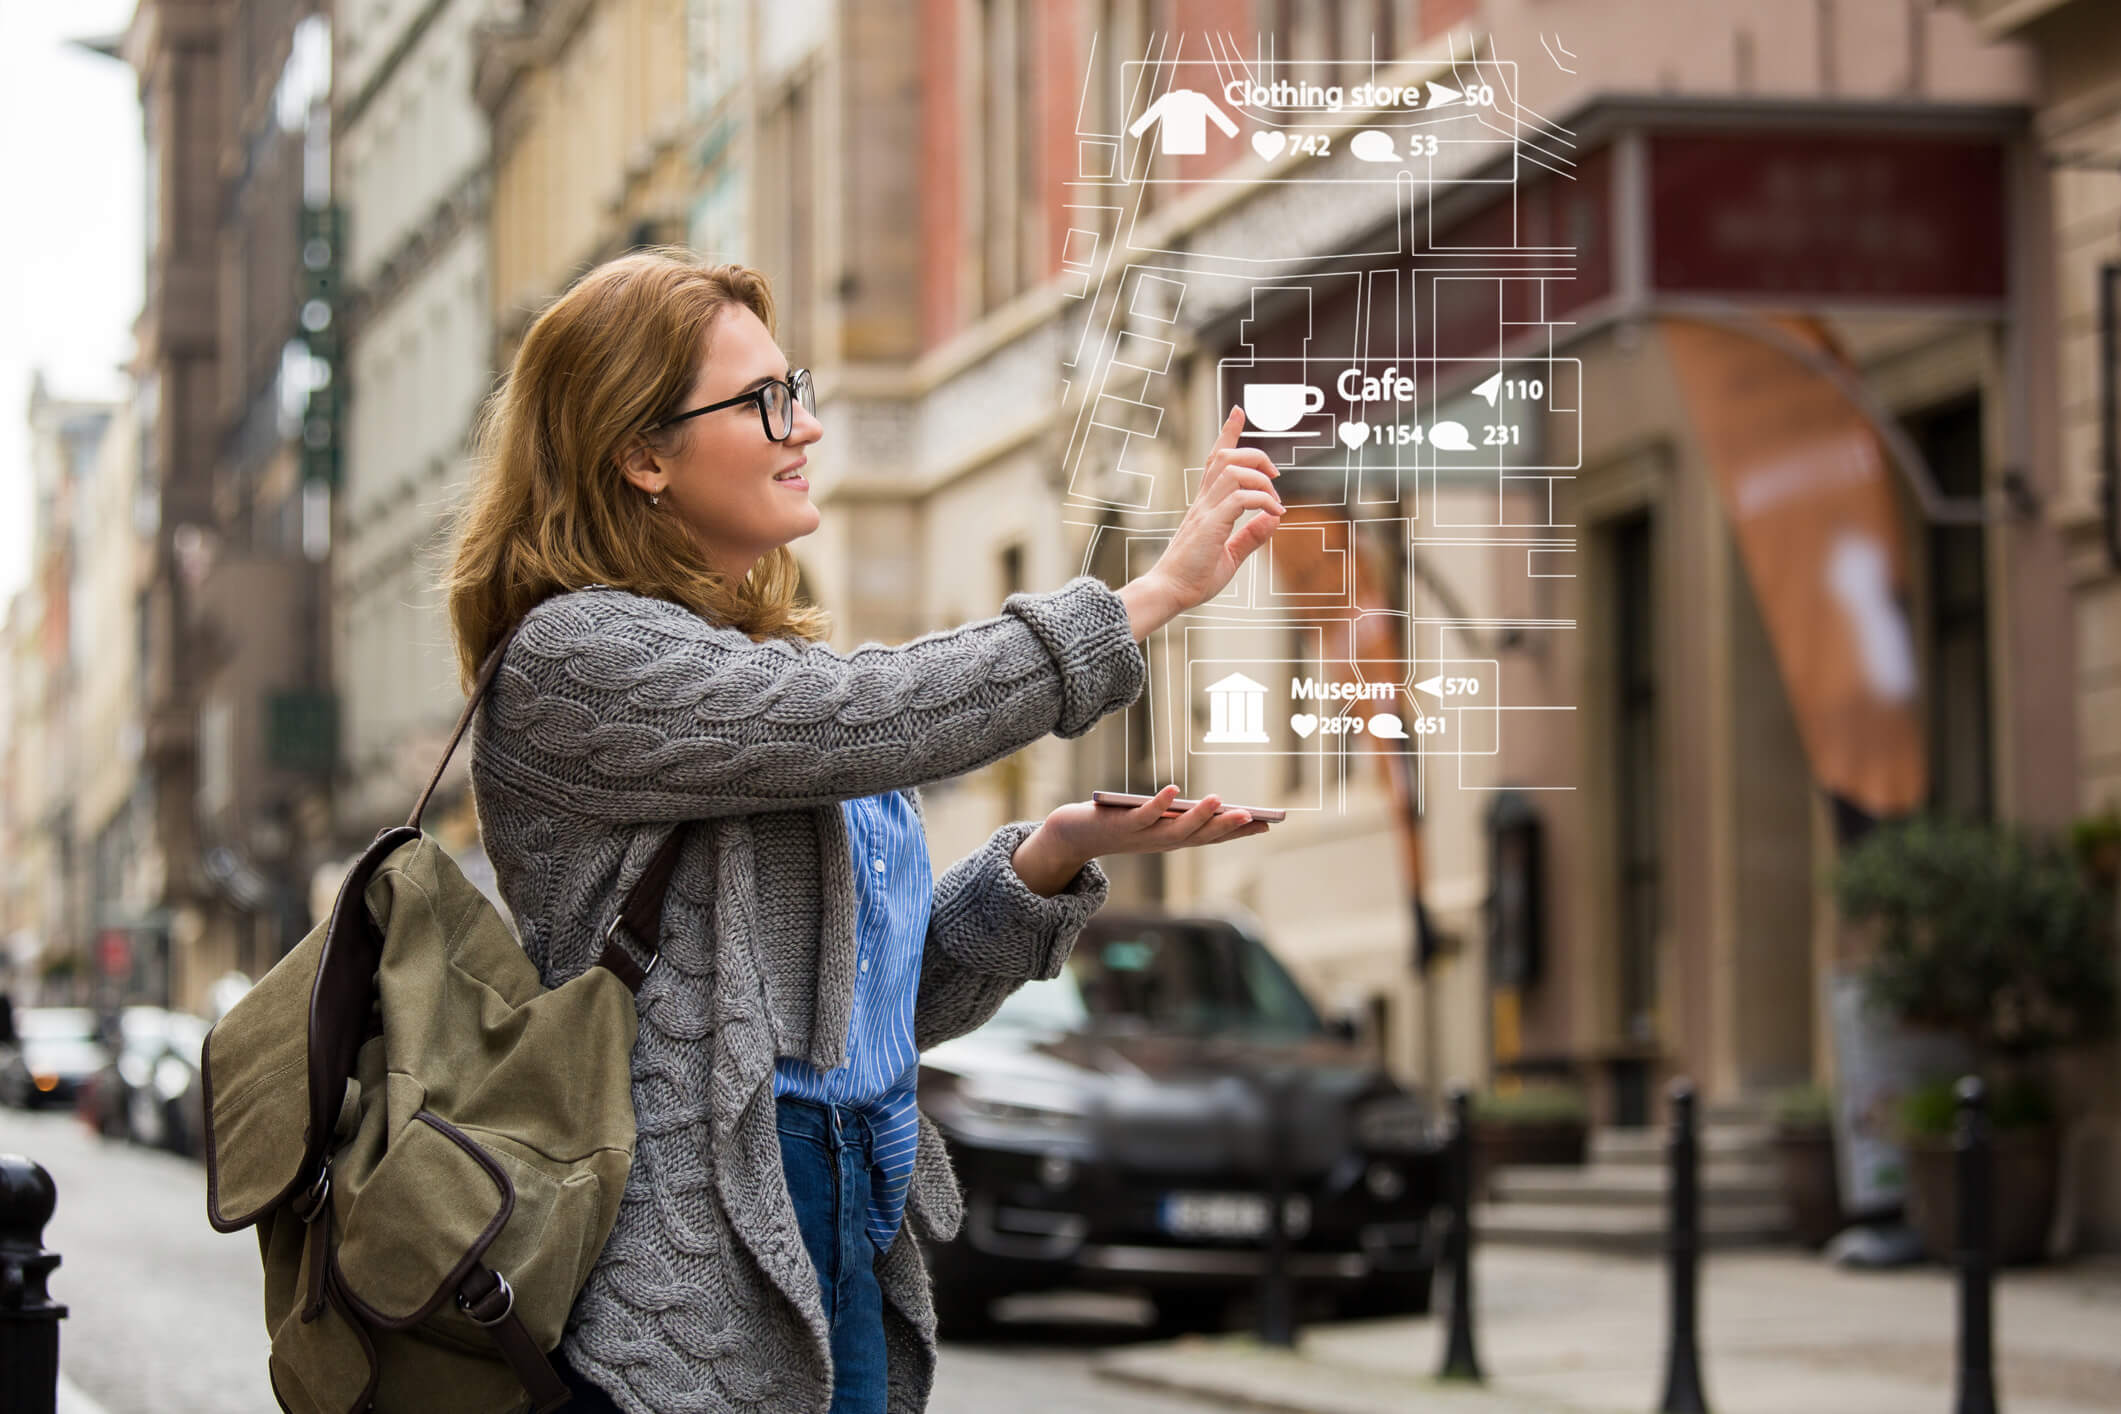 Augmented reality in marketing